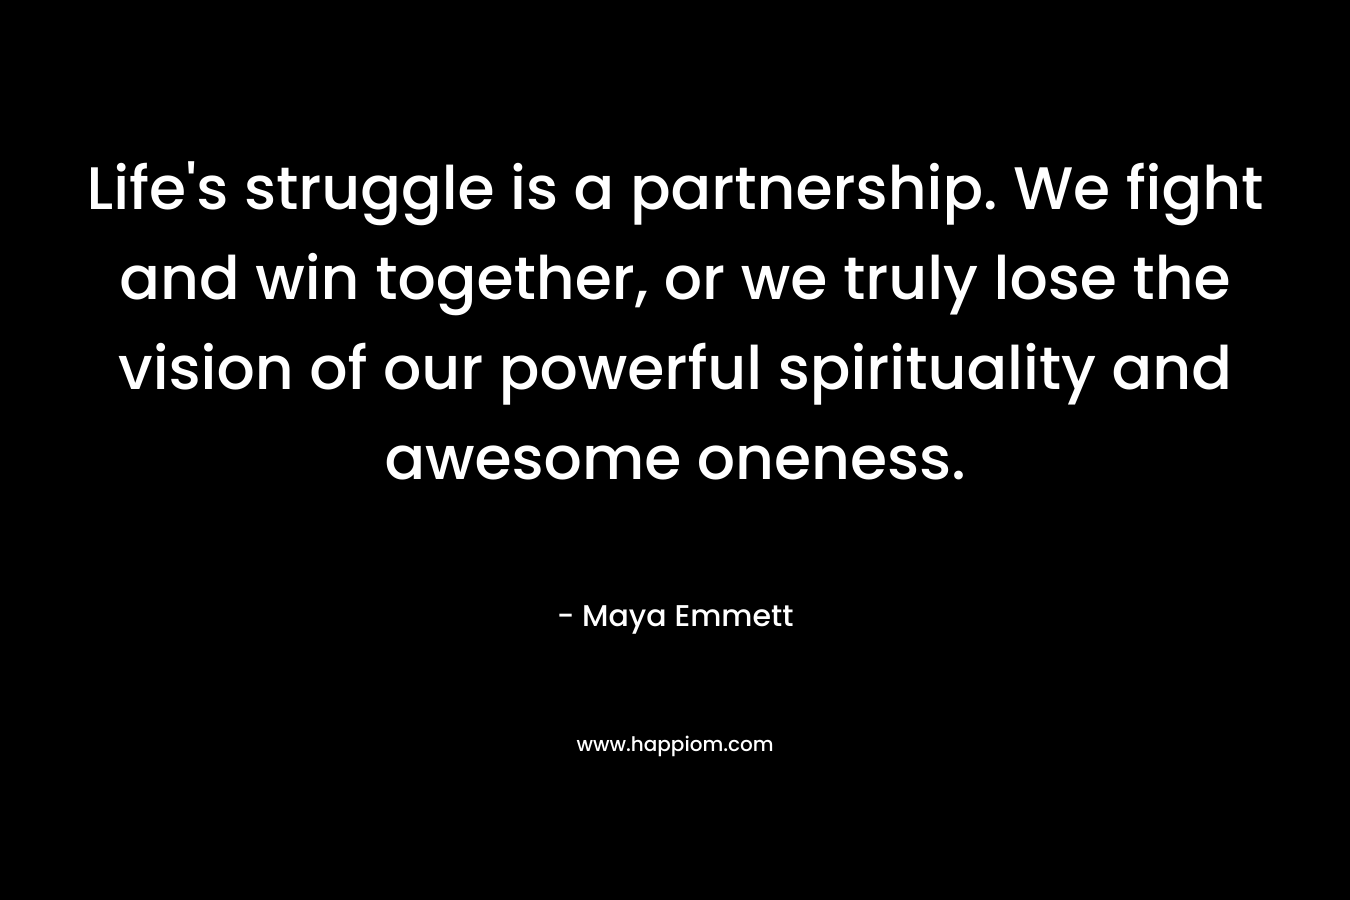 Life’s struggle is a partnership. We fight and win together, or we truly lose the vision of our powerful spirituality and awesome oneness. – Maya Emmett